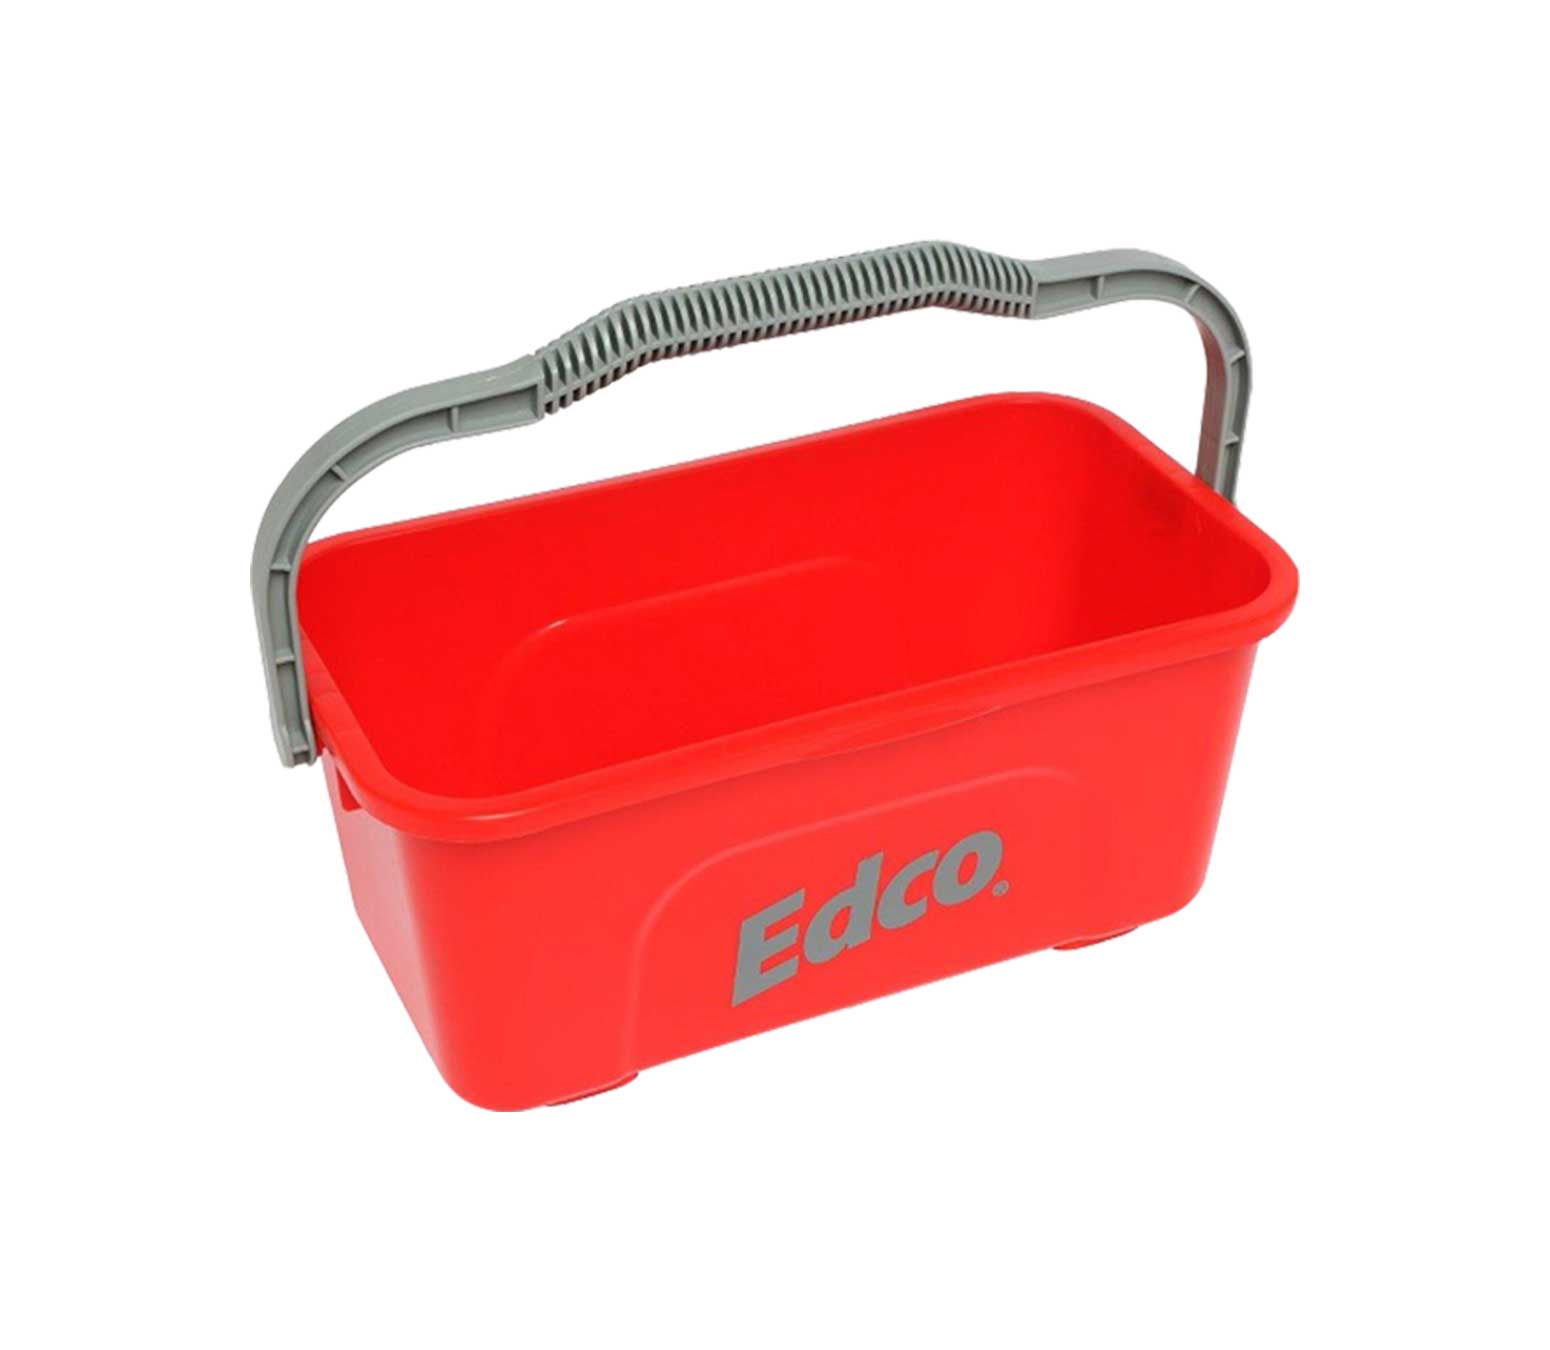 Edco All-Purpose Mop & Squeegee Bucket 11 Ltr.